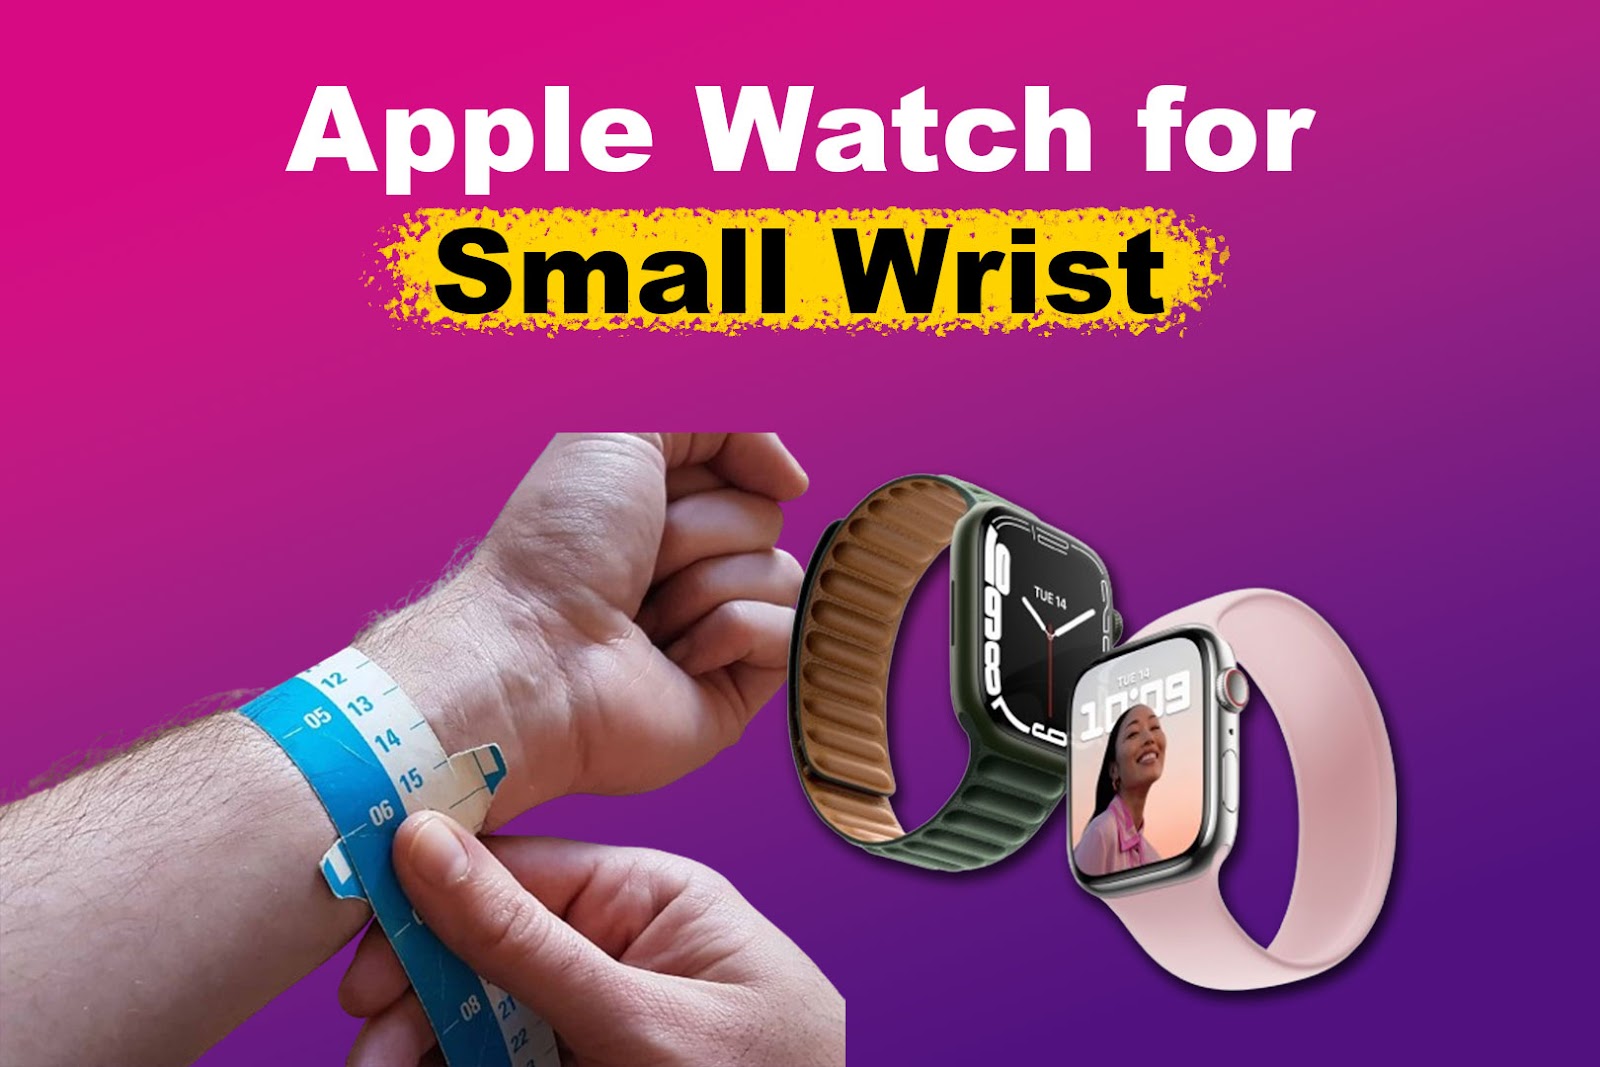 Apple Watch for Small Wrist